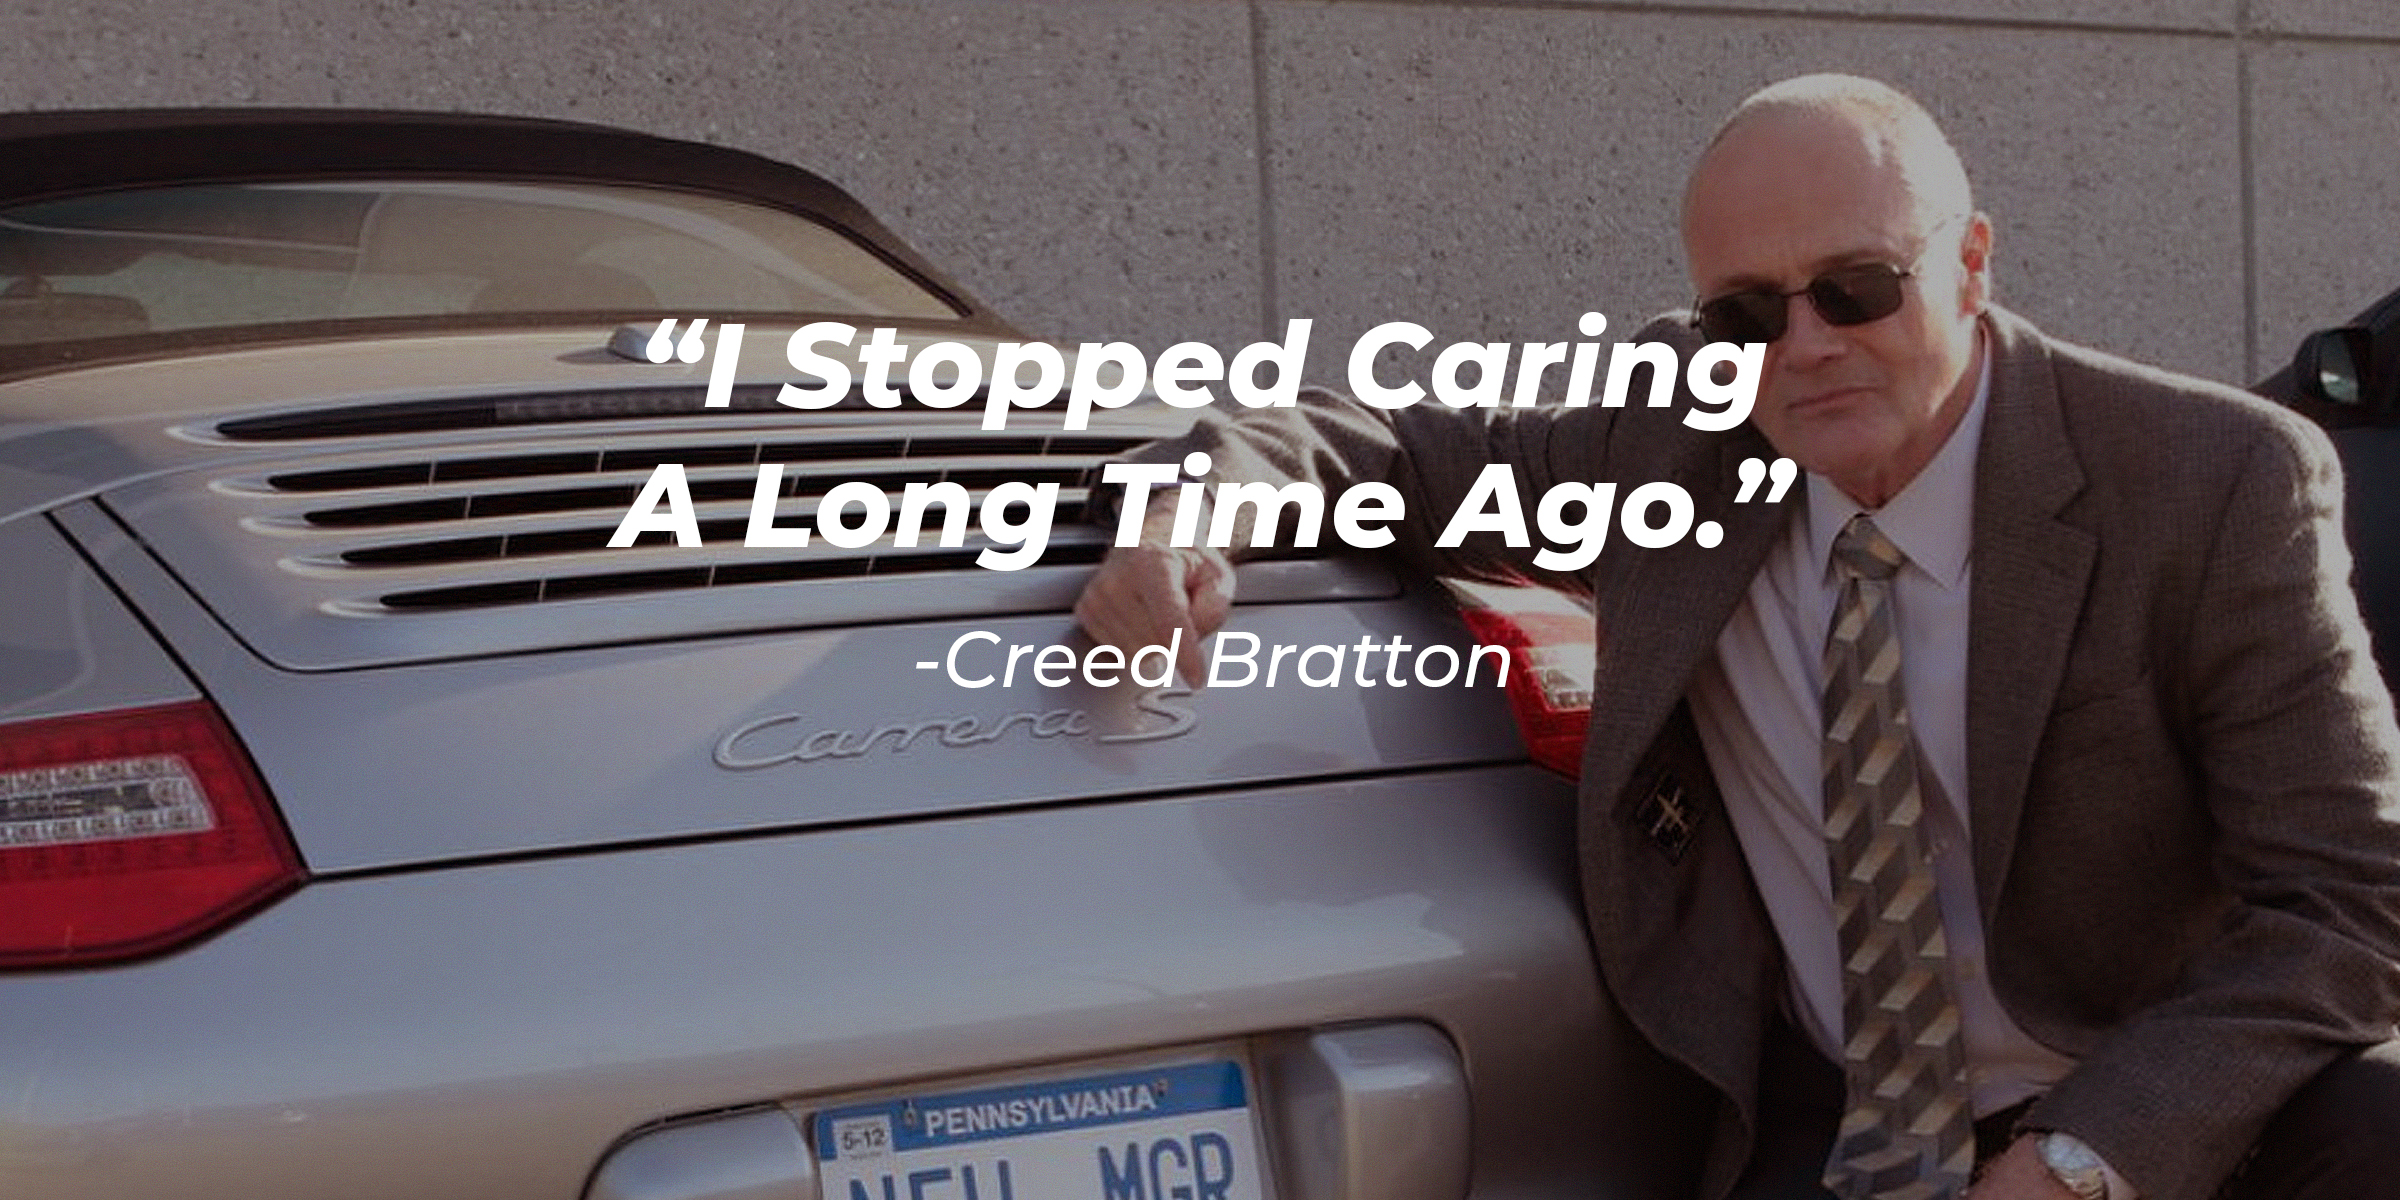 Creed Bratton with his quote: "I Stopped Caring A Long Time Ago." | Source: facebook.com/TheOfficeTV